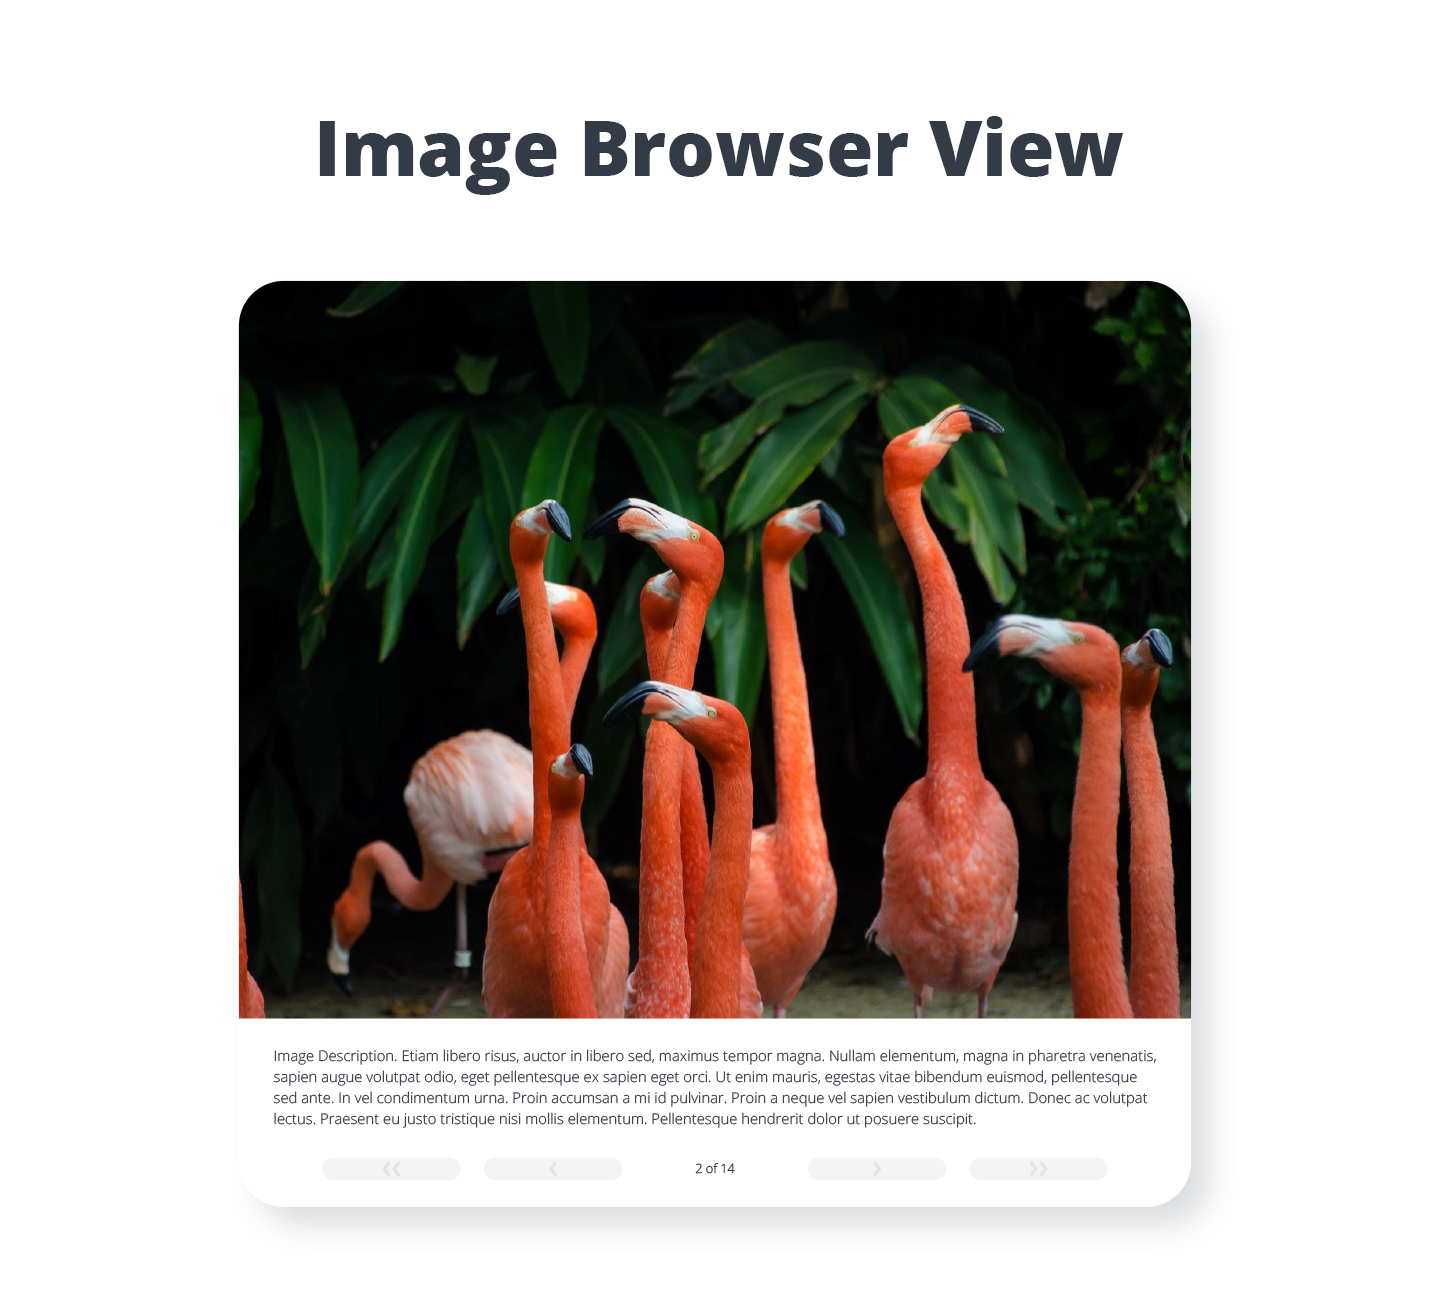 Photo Gallery - Image Browser View